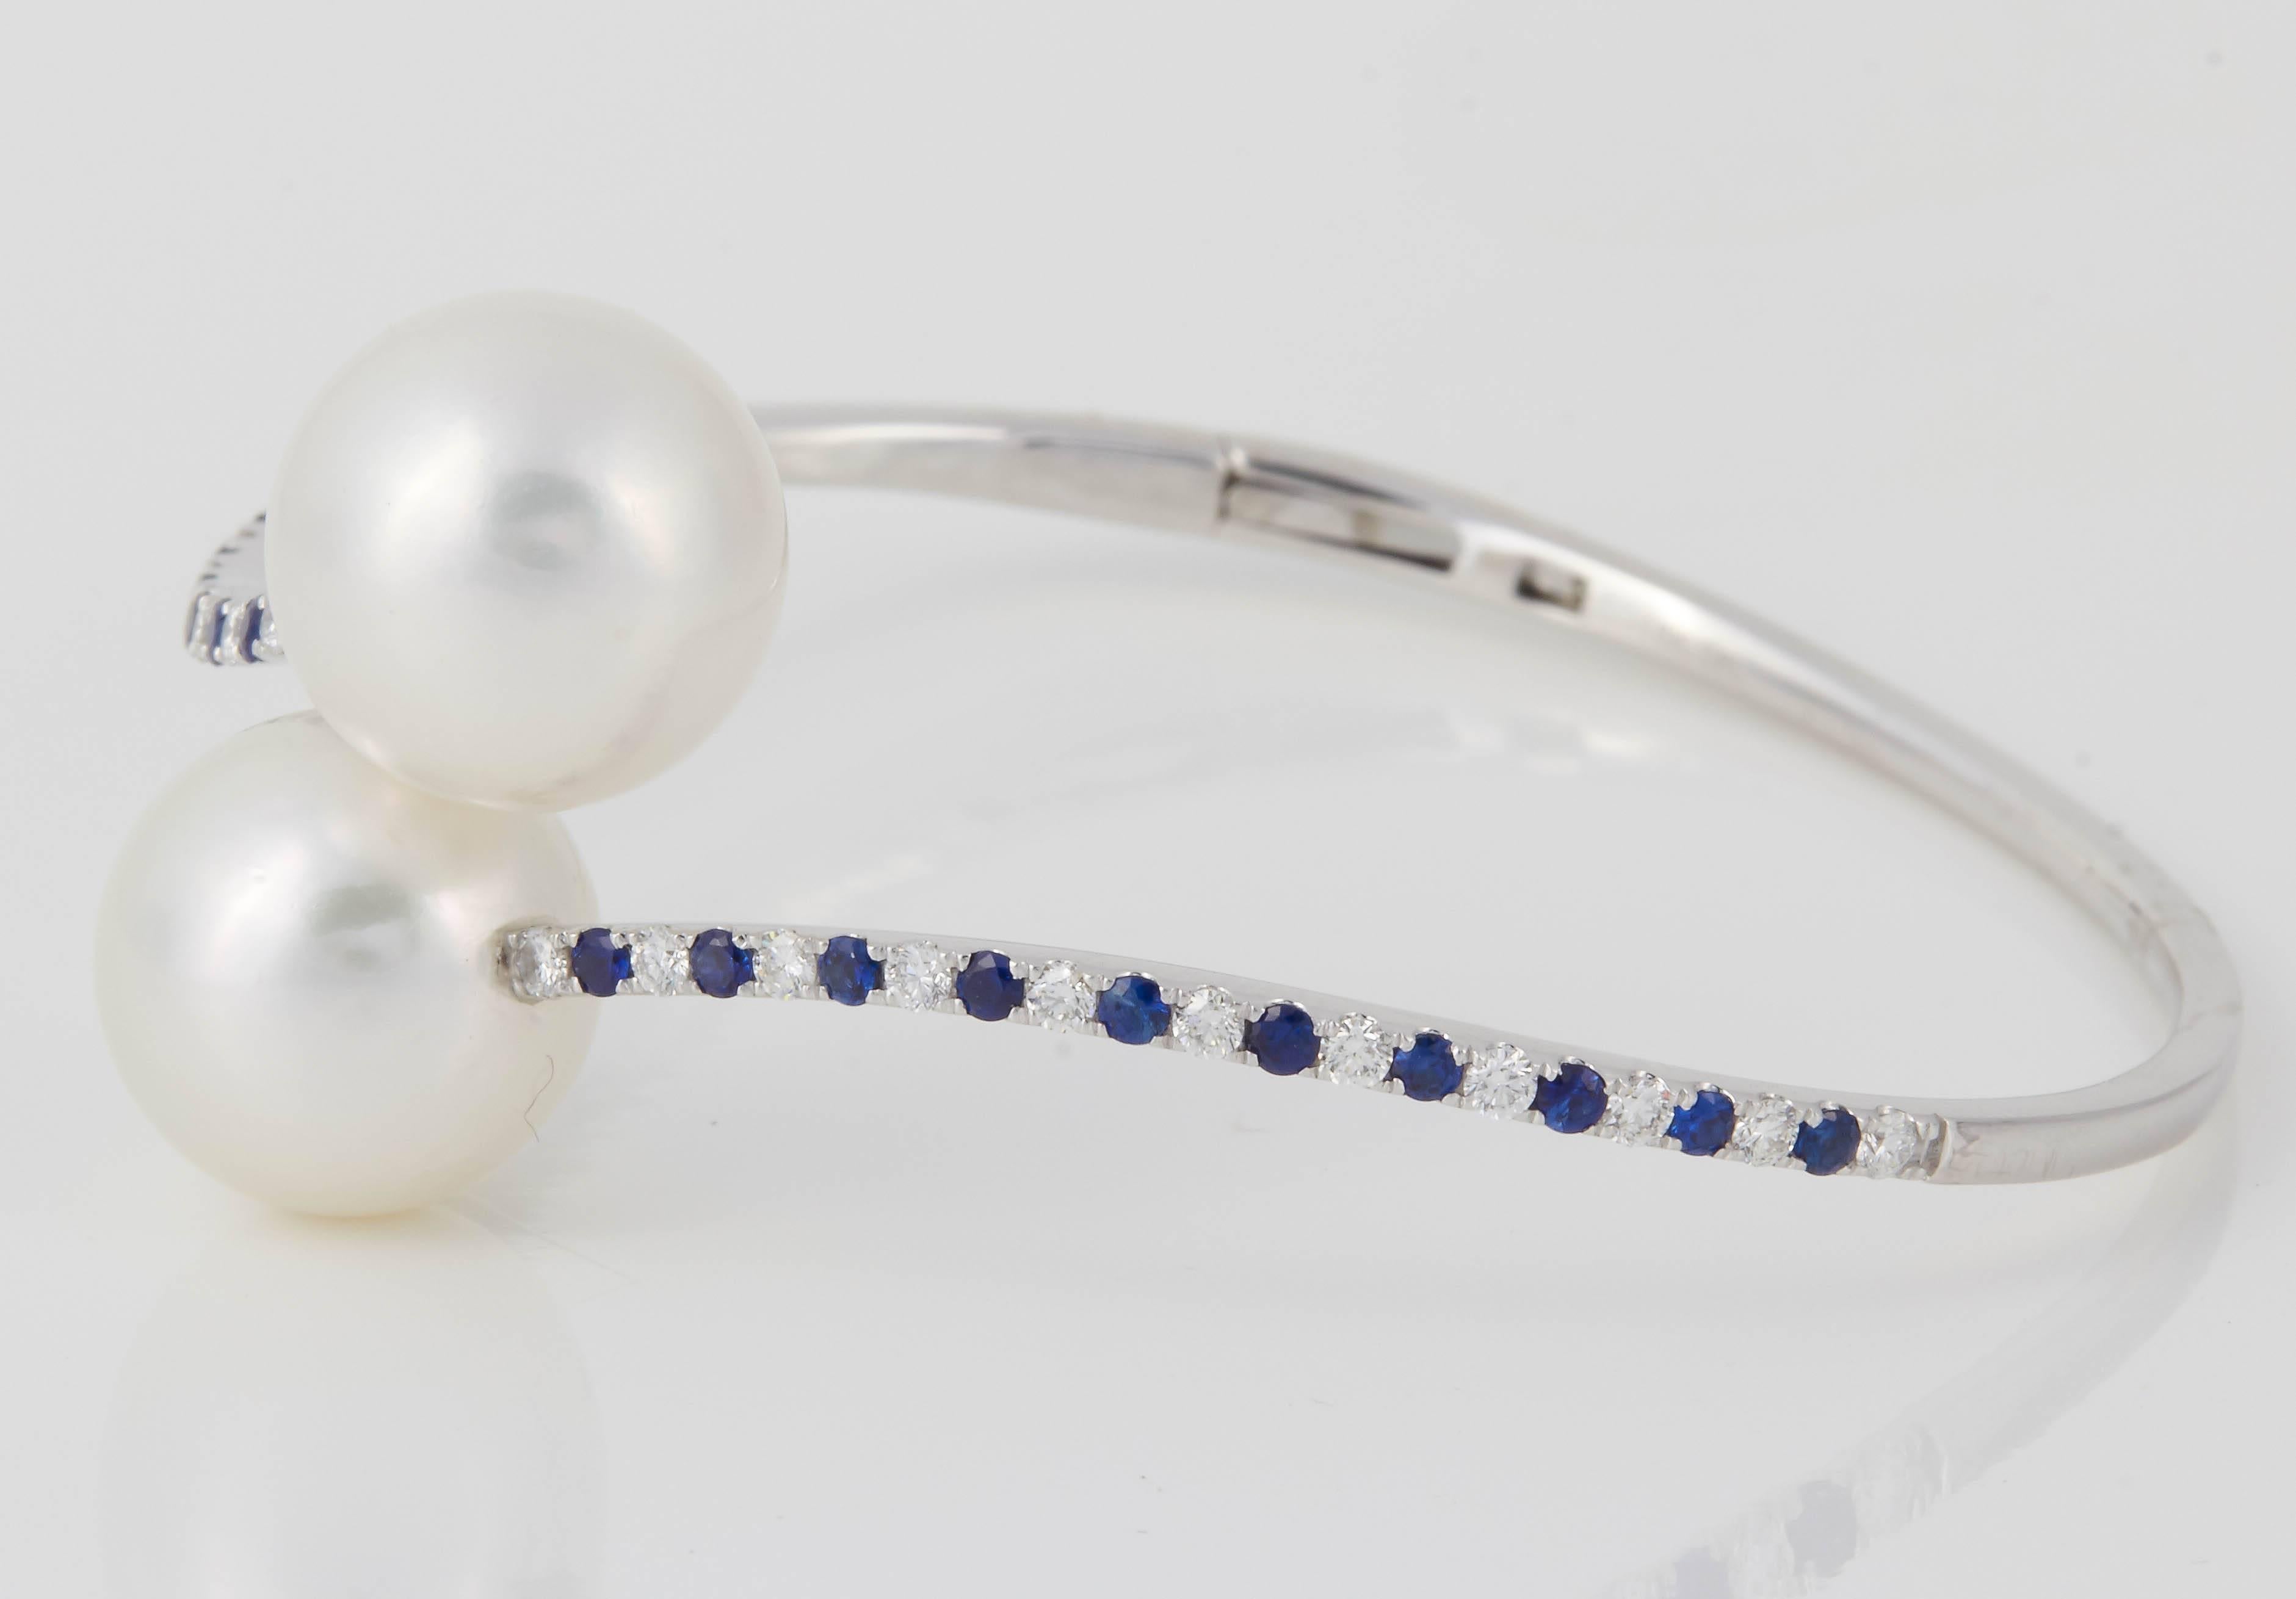 18K White gold bypass bangle bracelet featuring two South Sea Pearls measuring 13 mm flanked with sapphires weighing 0.55 carats and diamonds weighing 0.55 carats.
8.5 Grams
Color G-H
Clarity SI

Pearls can be changed to Pink, Tahitian or Golden